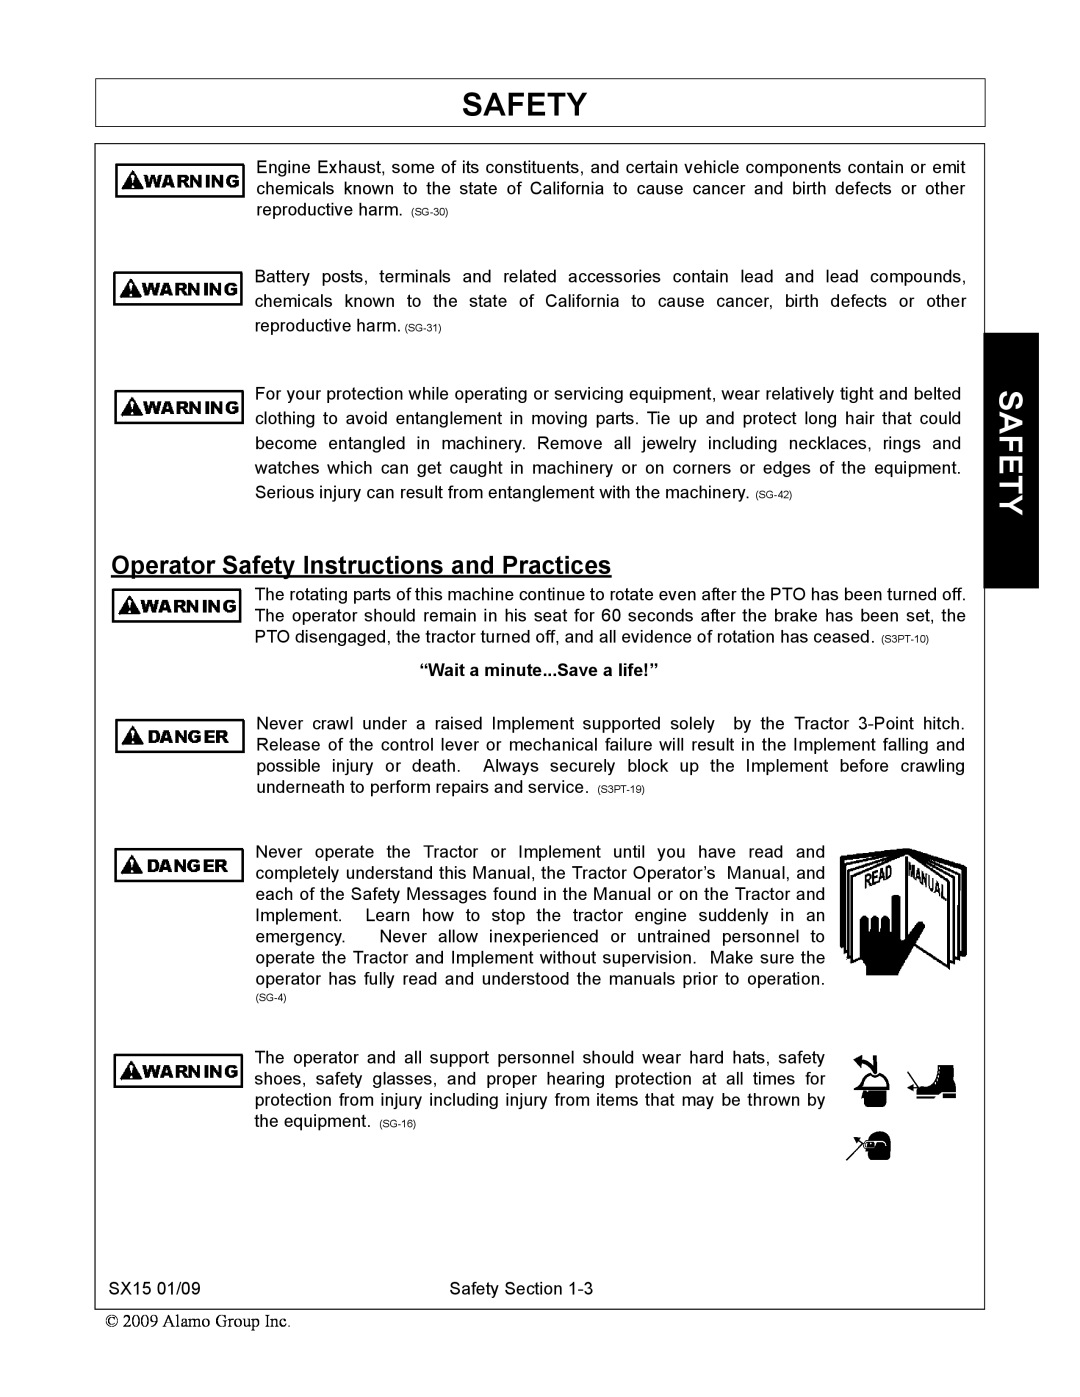 Alamo SX15 manual Operator Safety Instructions and Practices, “Wait a minute...Save a life!” 